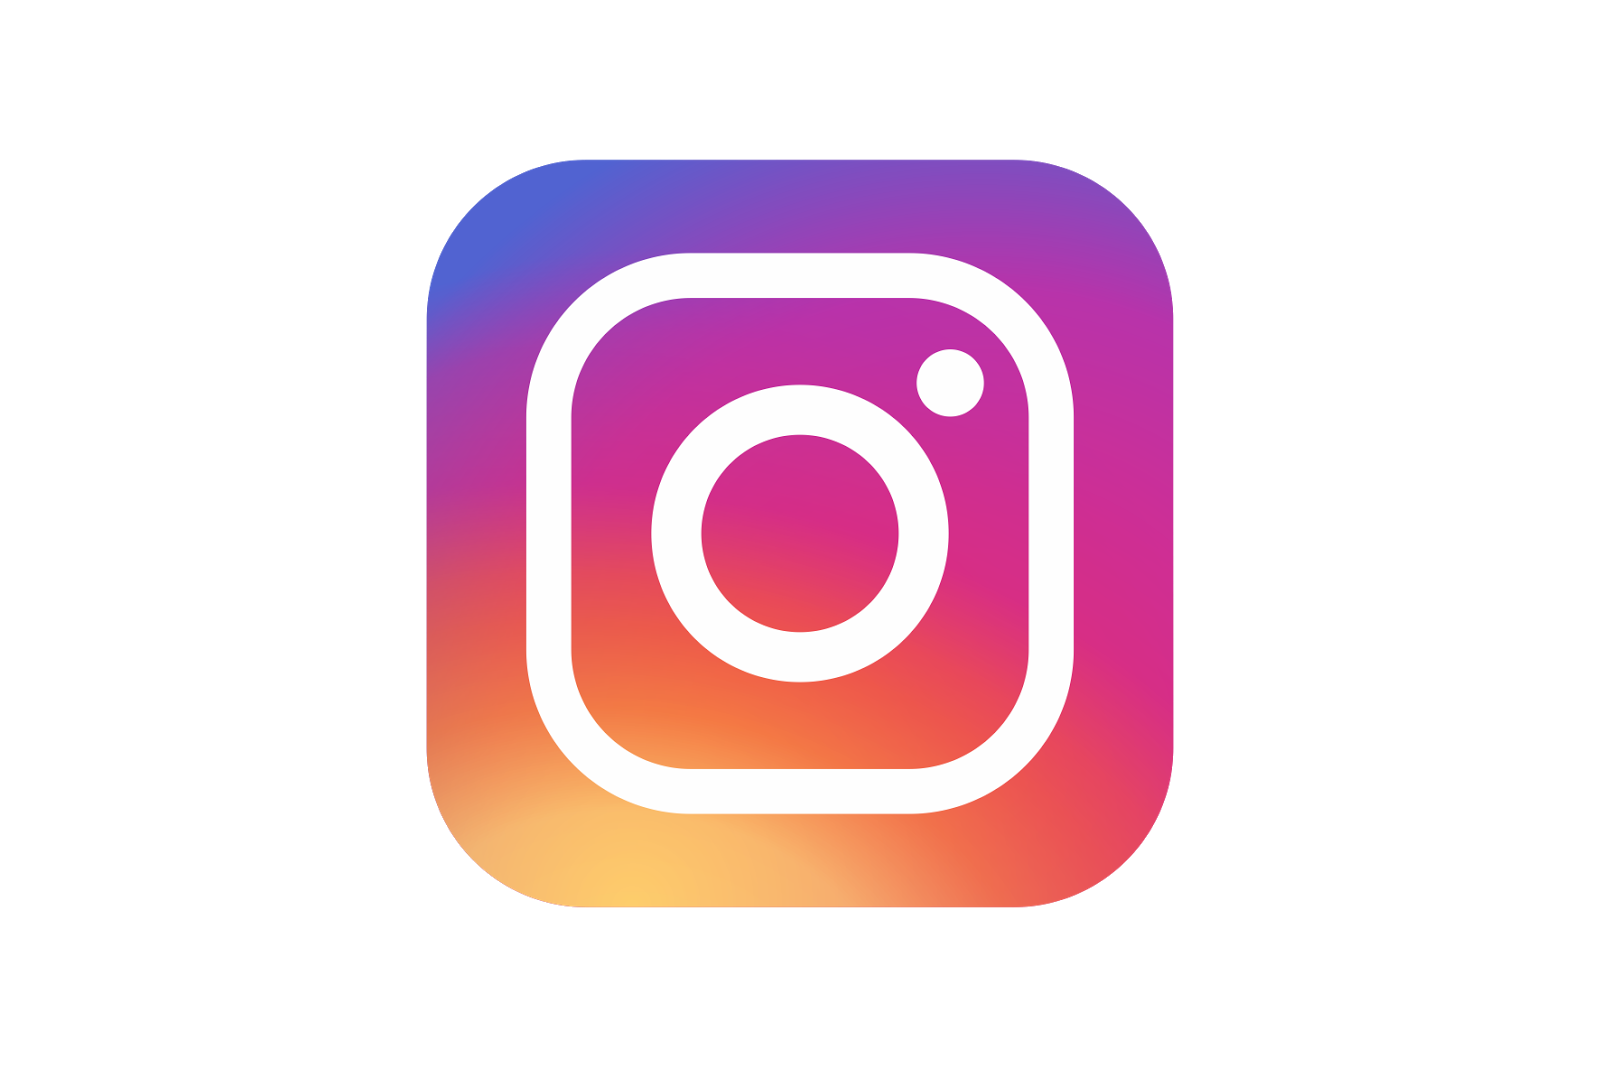 Download Logo Computer Camera Instagram Icons HQ Image ...